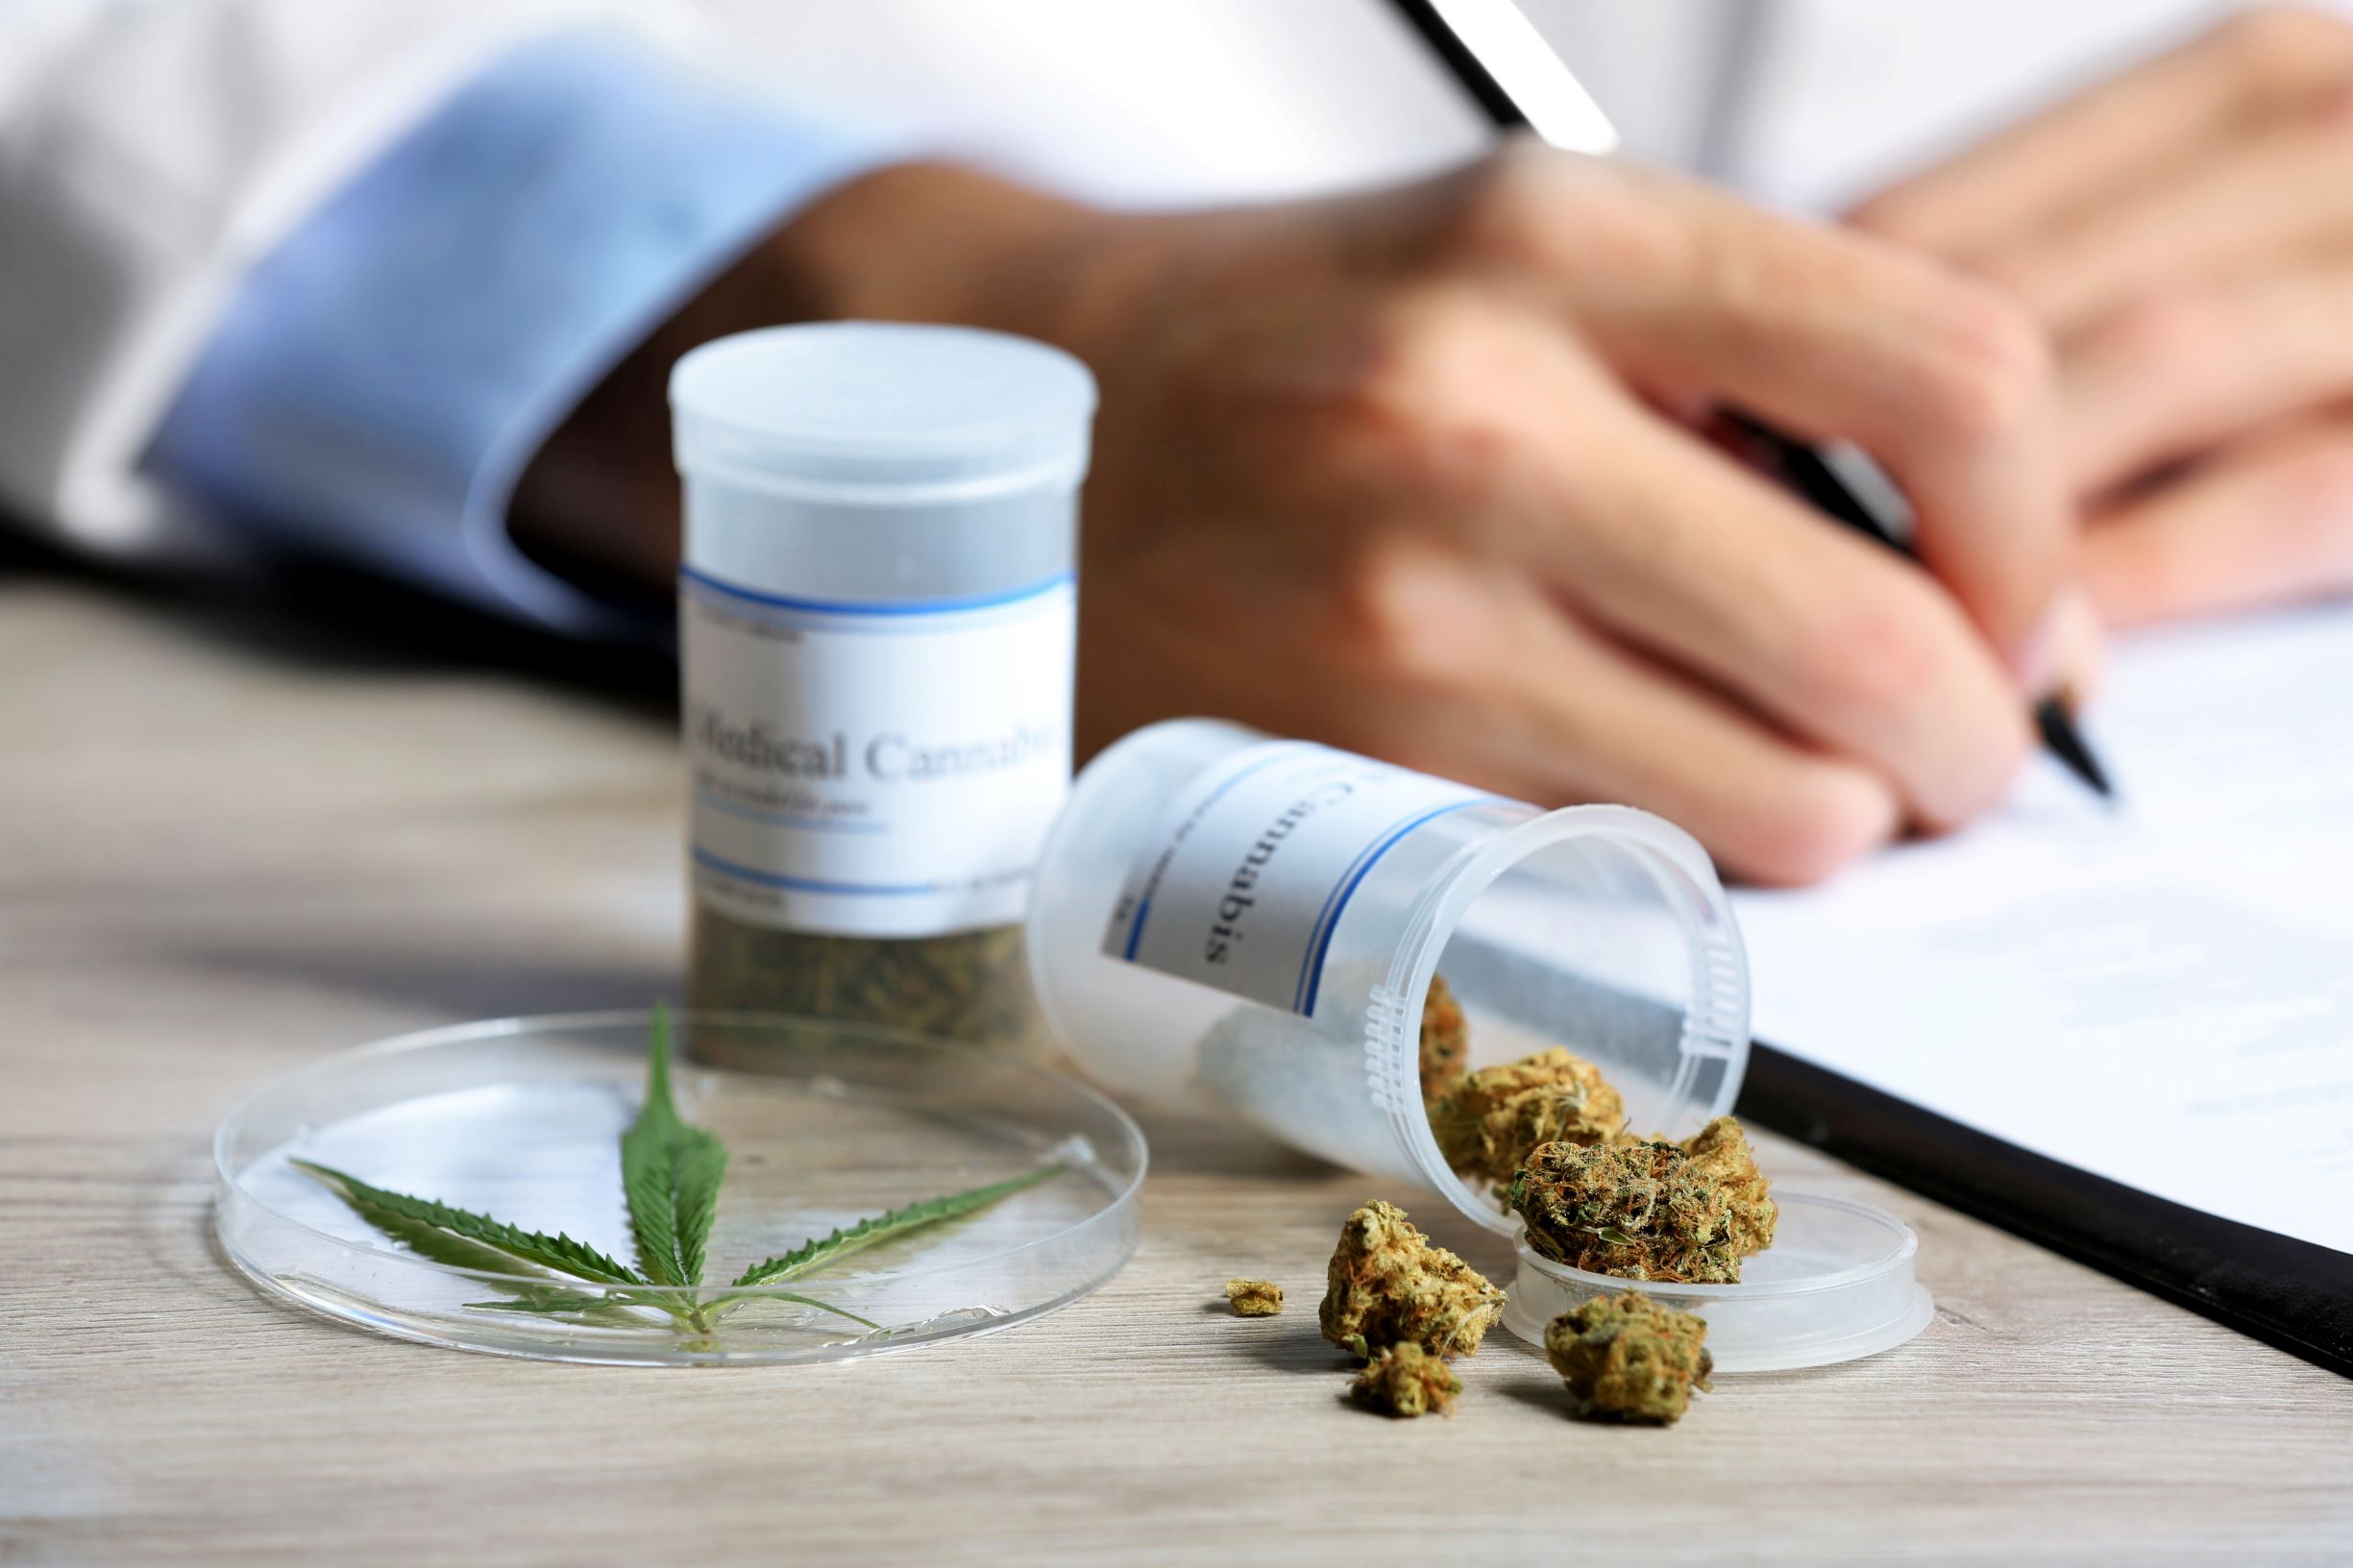 What is Medical Marijuana Effective Treatment For?